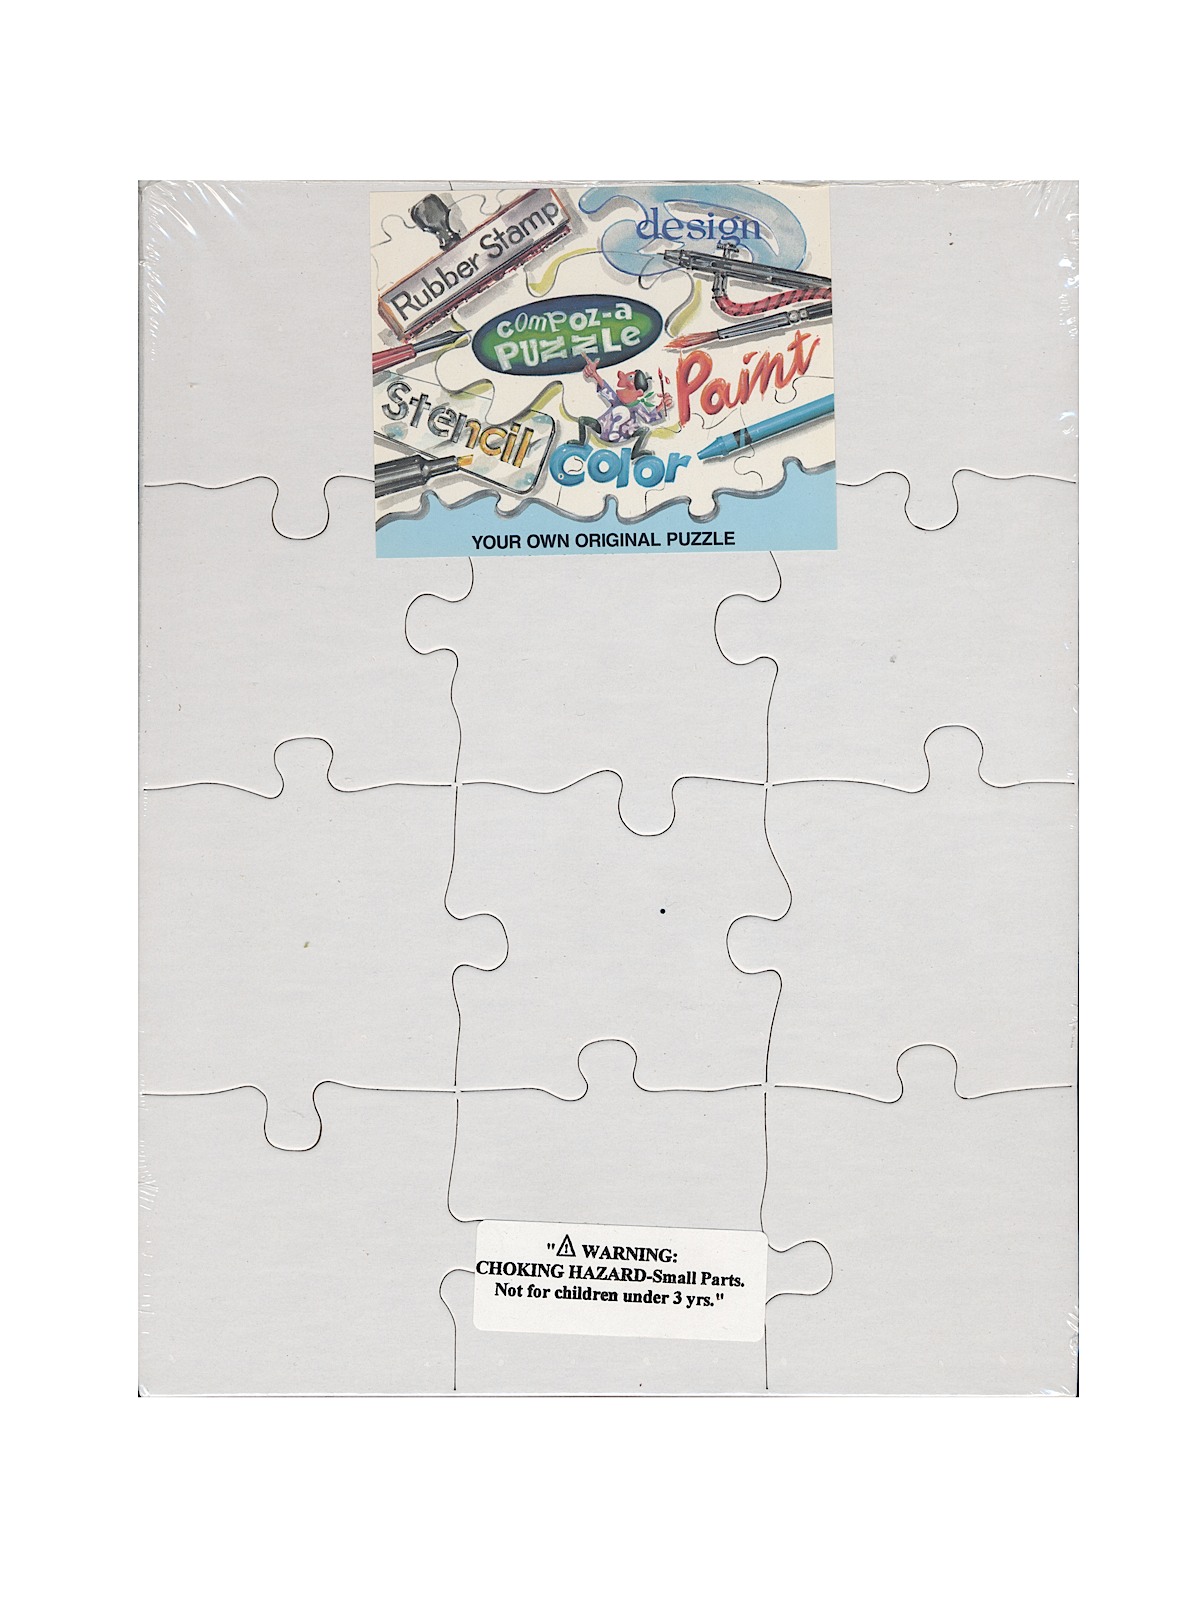 Blank Puzzles 8 1 2 In. X 11 In. 12 Pieces Each Pack Of 4